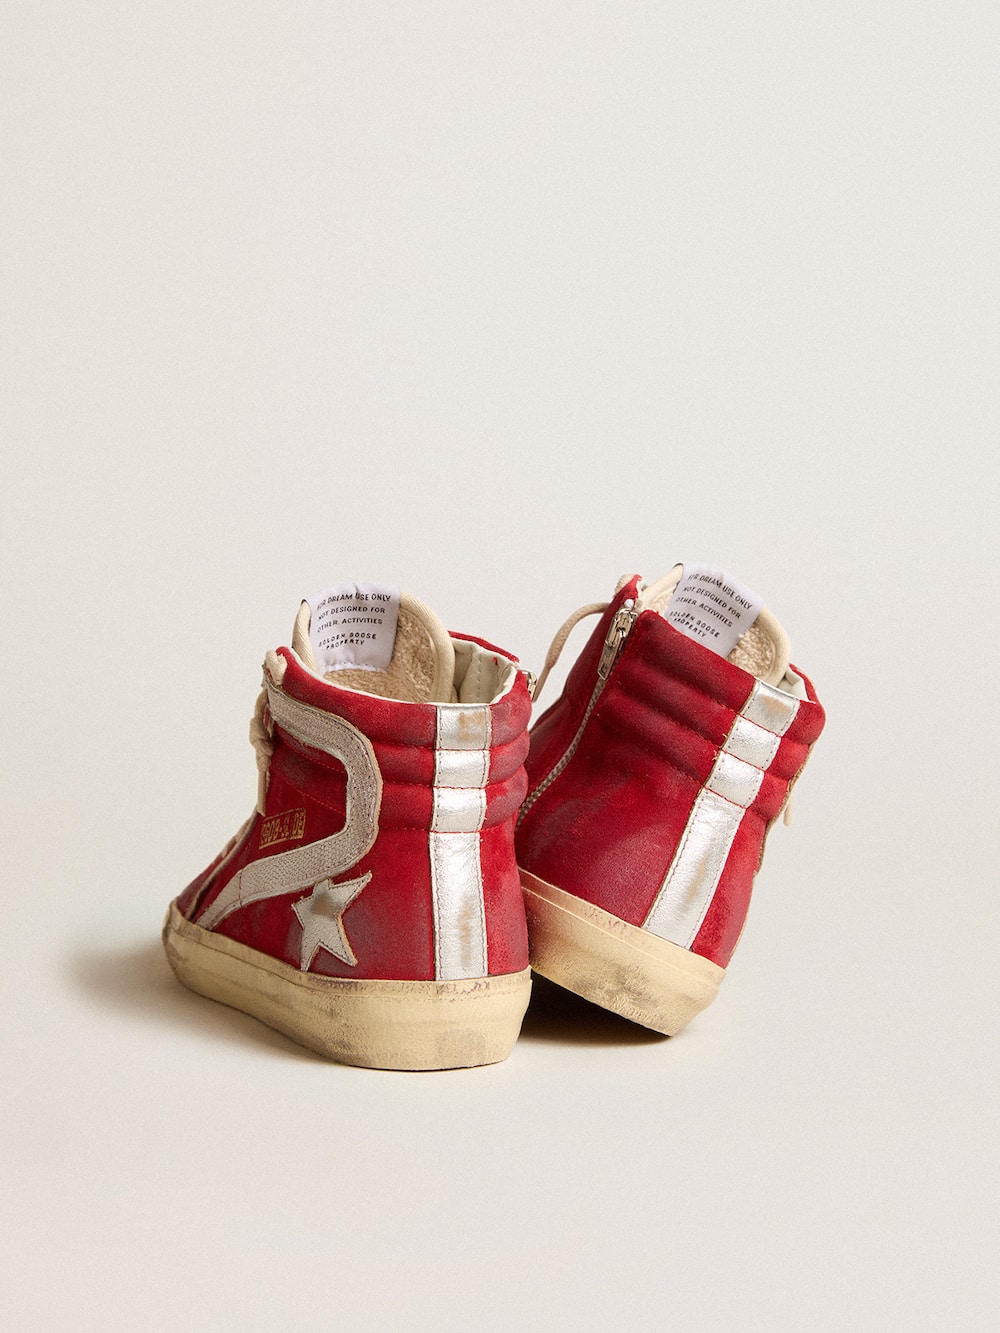 Golden Goose - Slide in red suede with silver star and lizard print flash in 